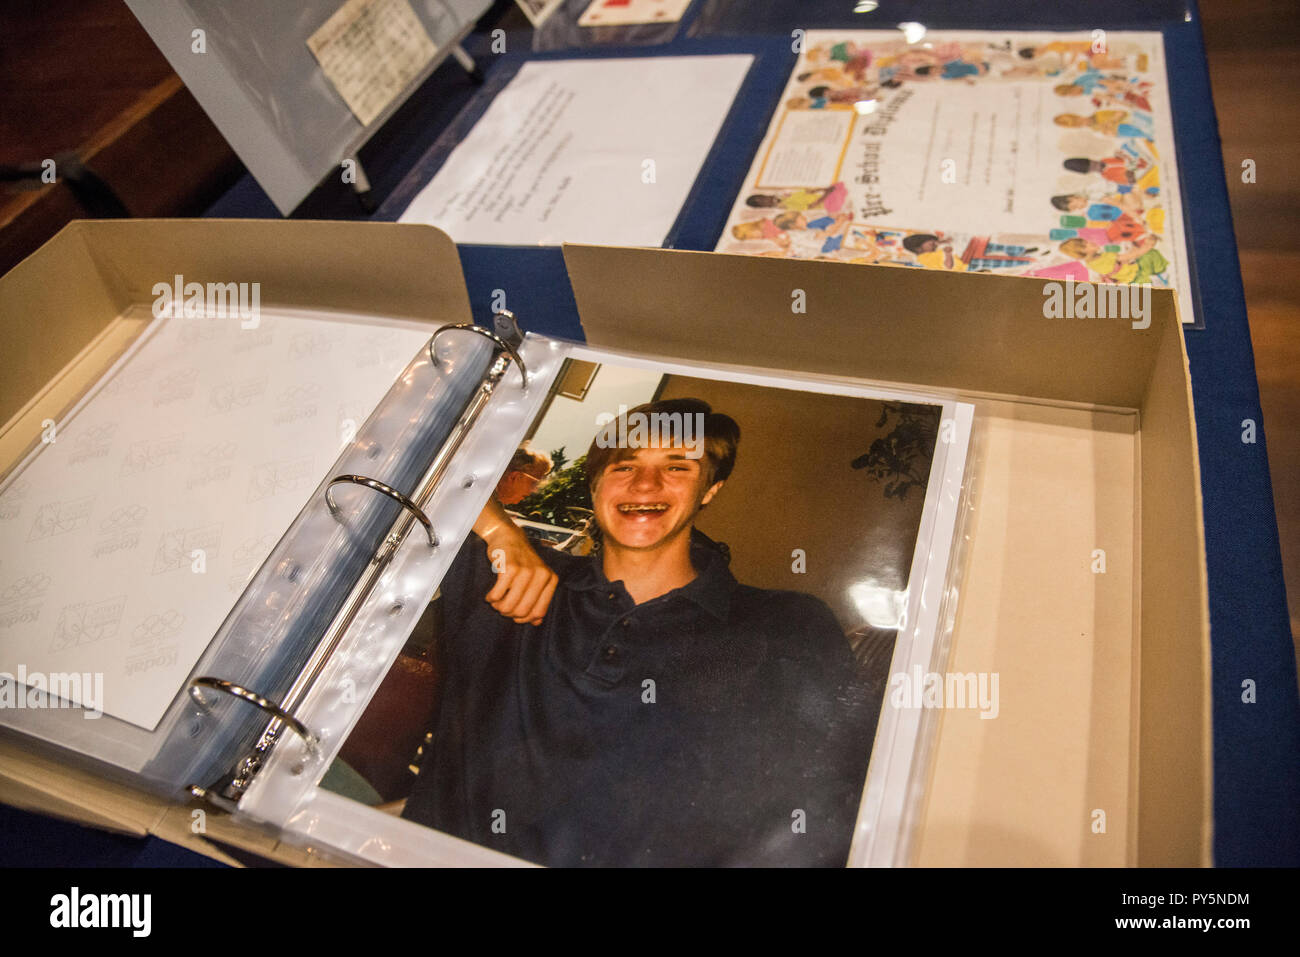 Washington DC, USA. October 25 ,2018: A photo of Matthew Shepard is on display. Dennis and Judy Shepard donate personal papers and objects from their son, Matthew Shepard, a young gay college student who was murdered 20 years ago in October in Wyoming to the Smithsonian National  Museum of American History in Washington, DC. Credit: Patsy Lynch/Alamy Live News Stock Photo